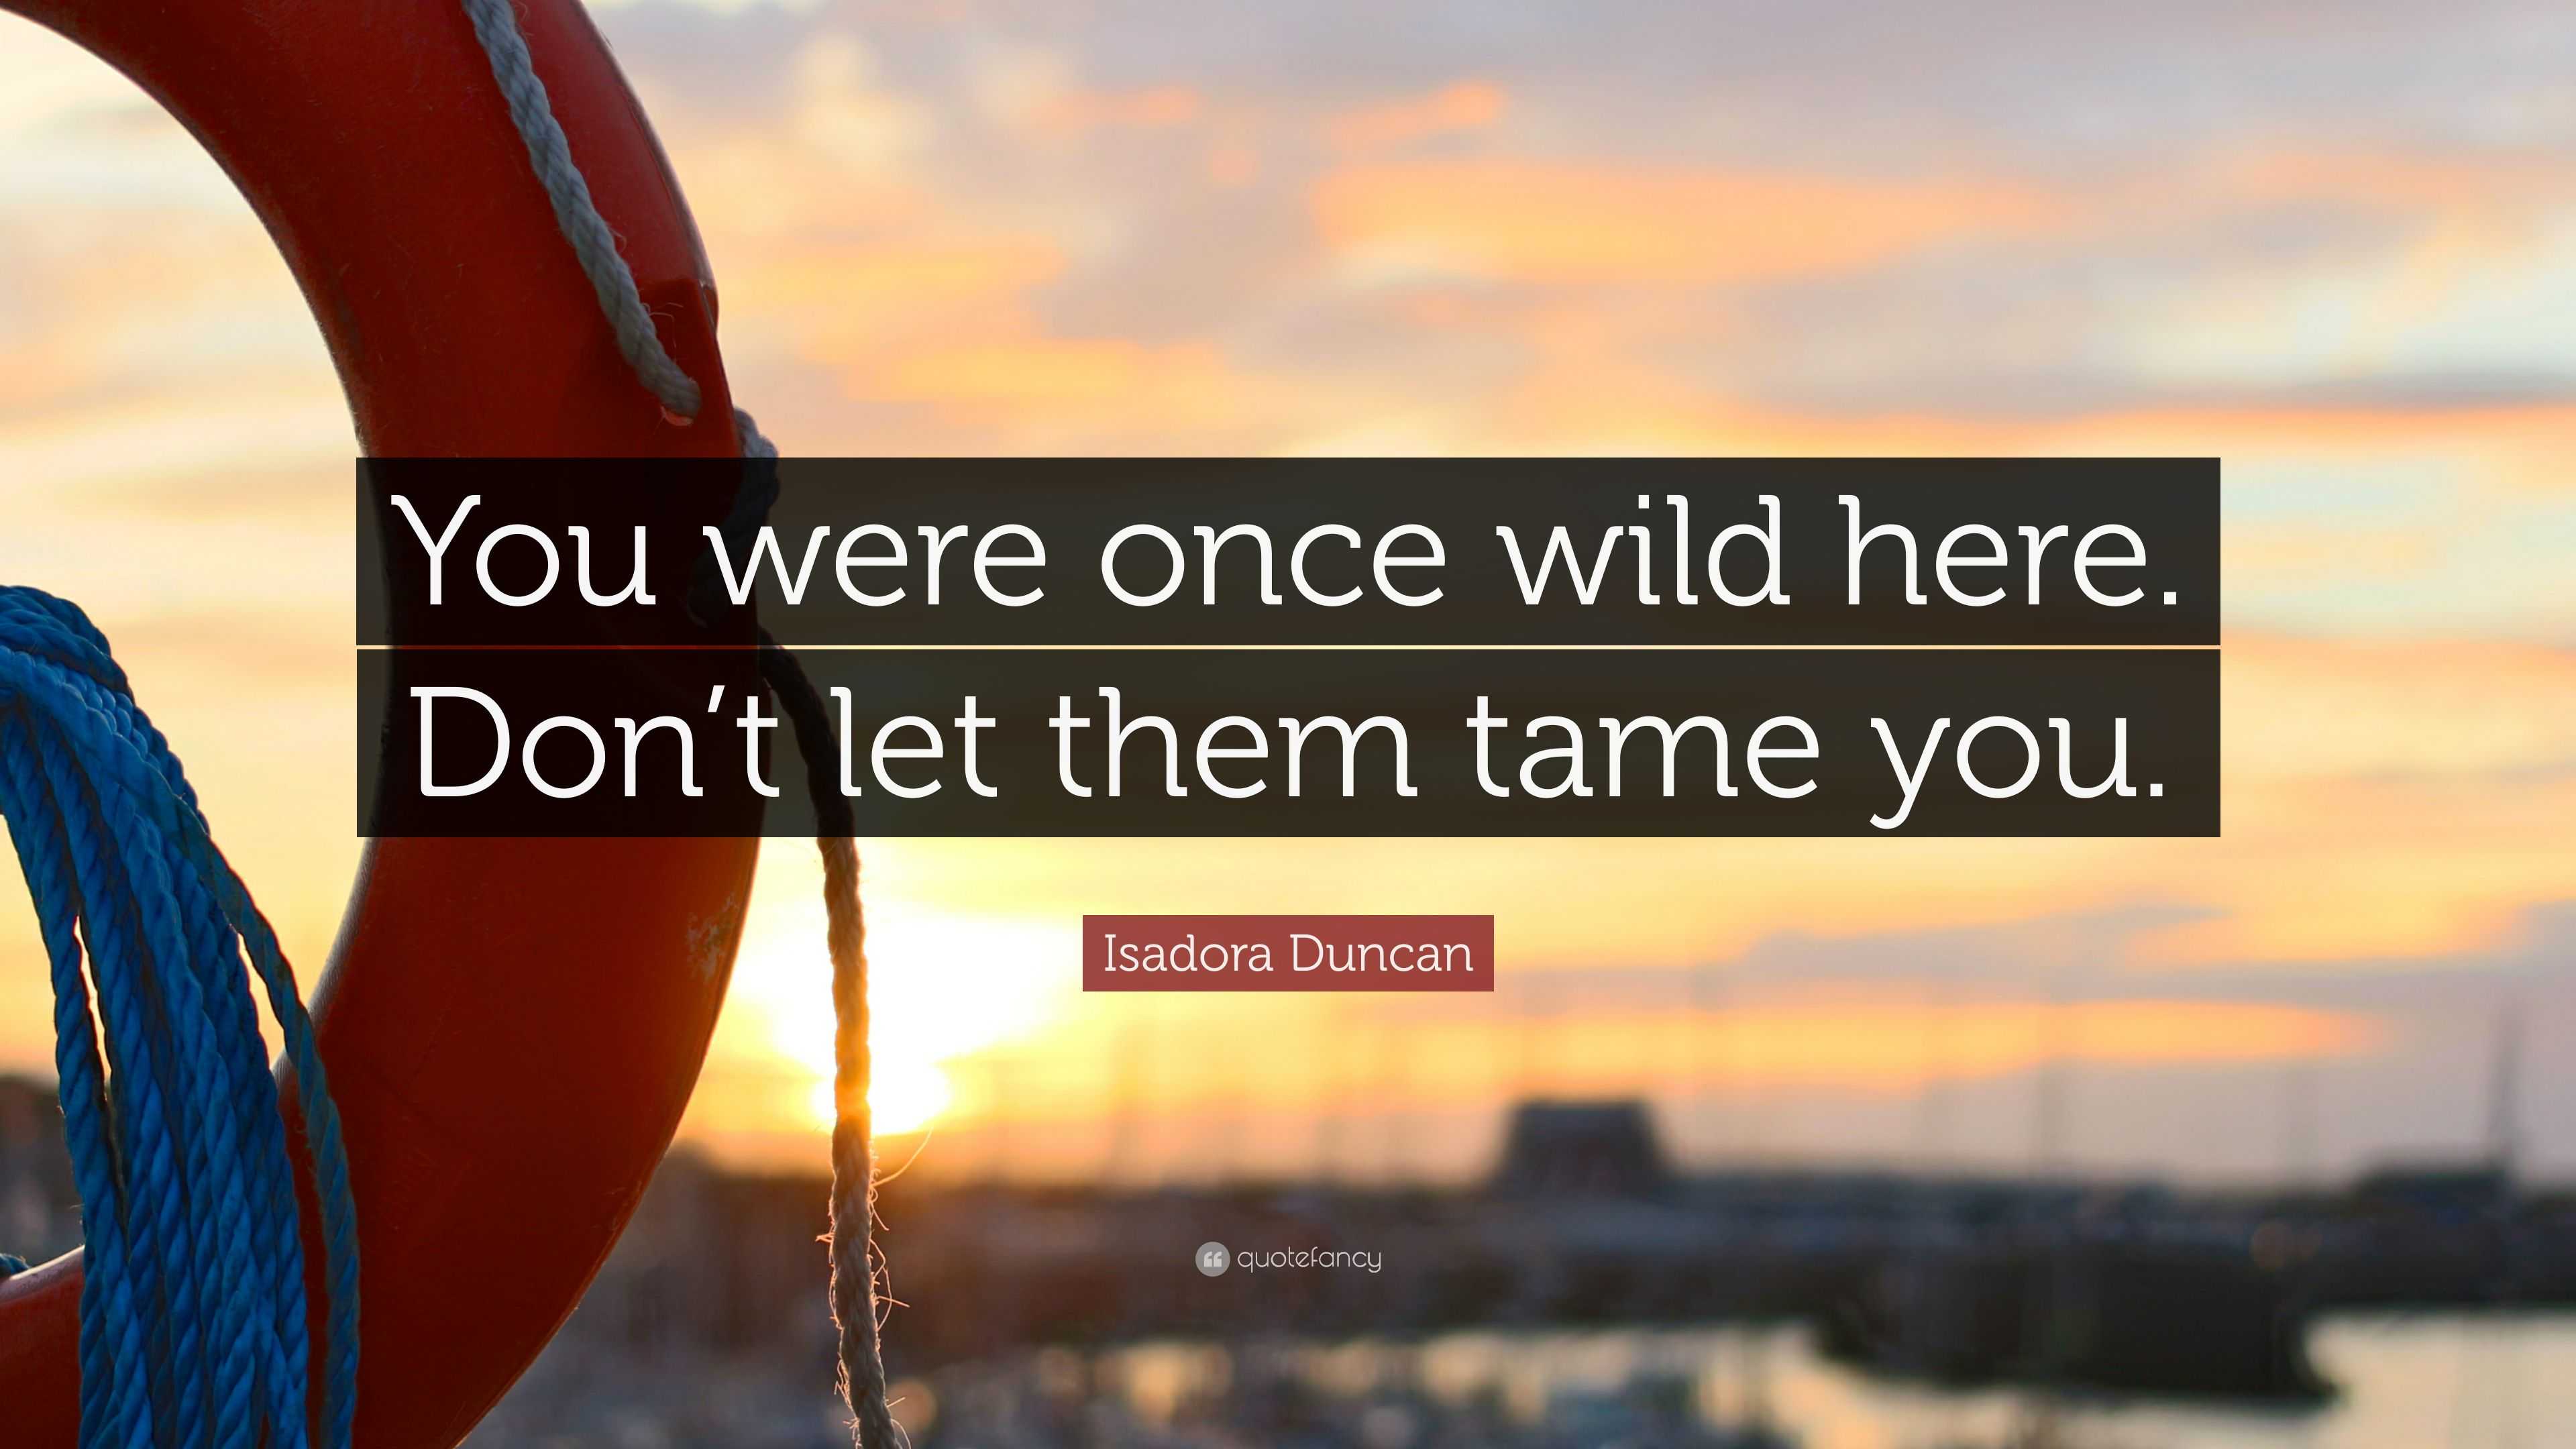 isadora duncan quotes you were wild here once